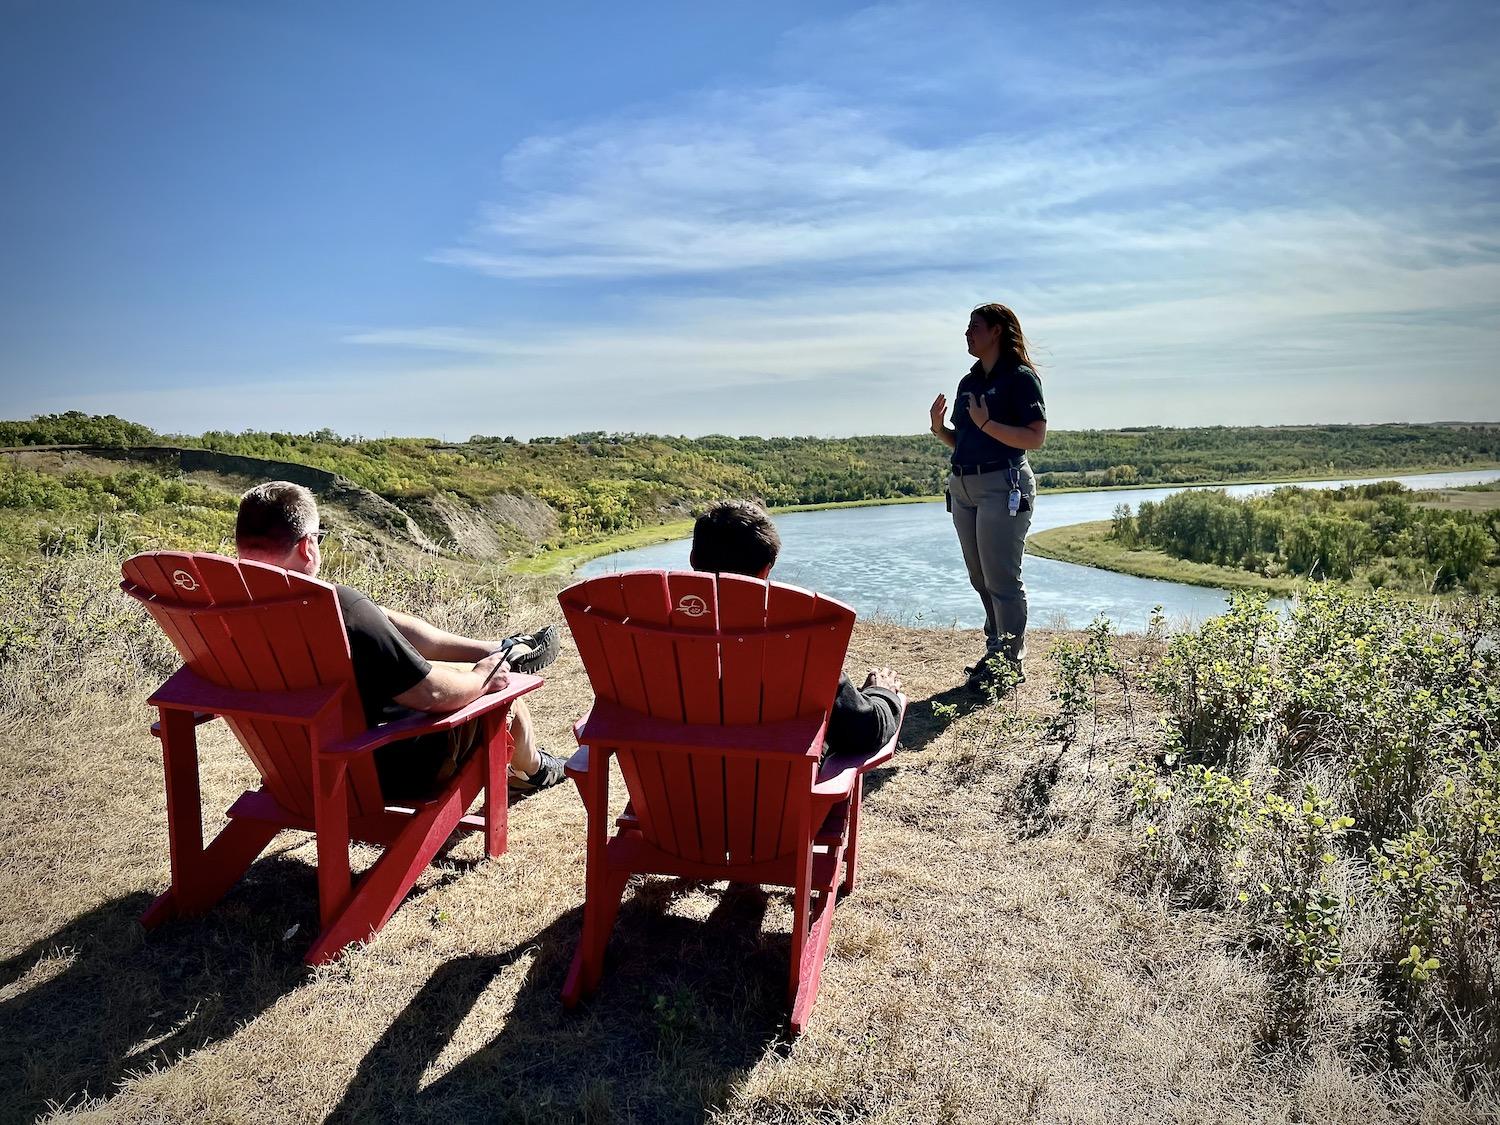 Sit in these Parks Canada red chairs for views of the South Saskatchewan River.